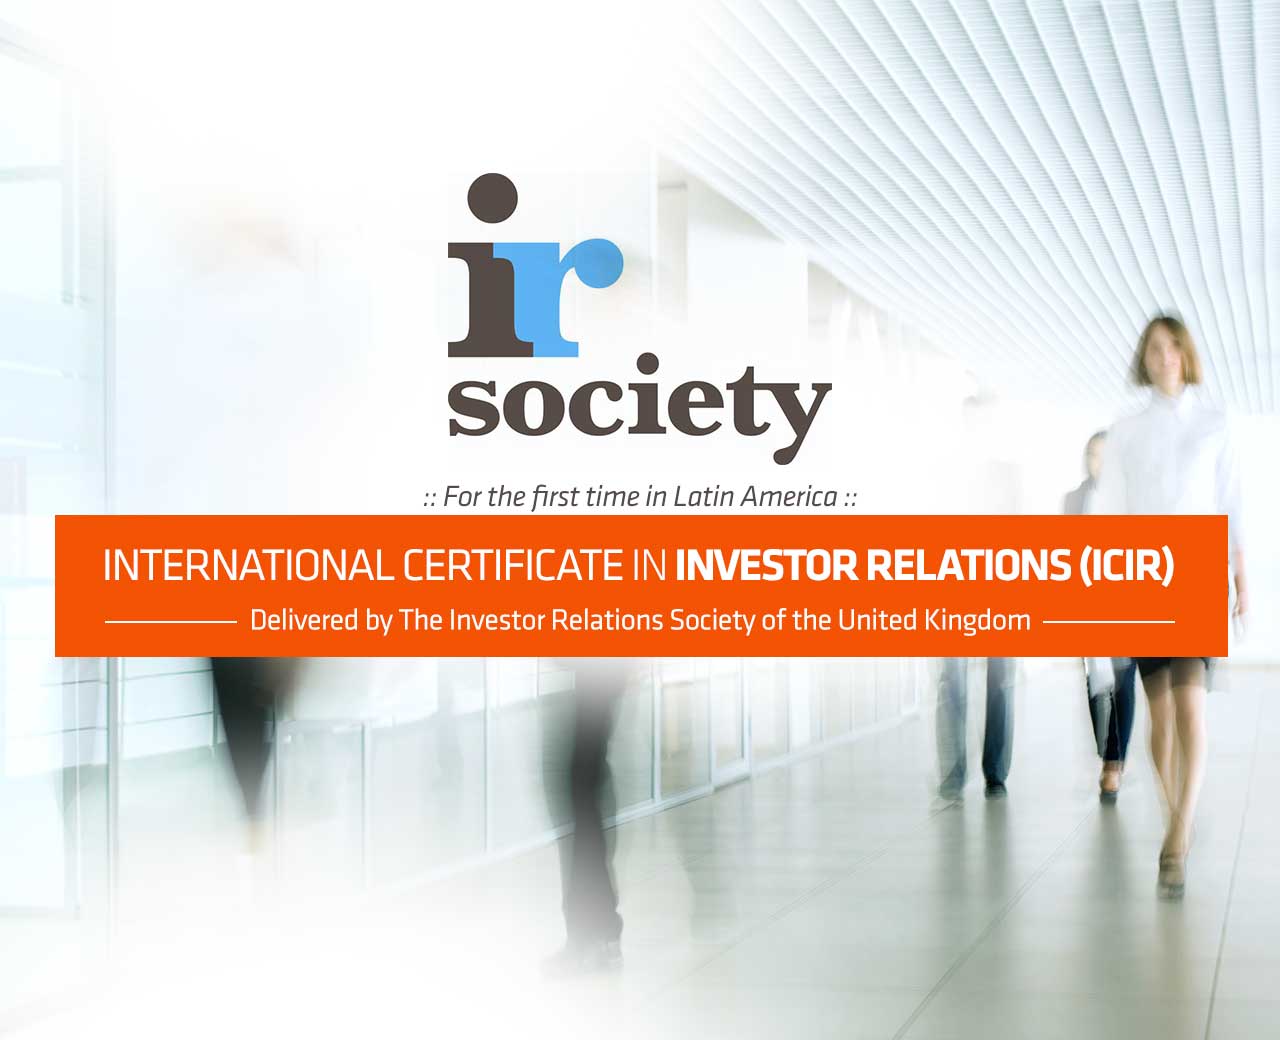 GovernArt and The IR Society announce the International Certificate in Investor Relations